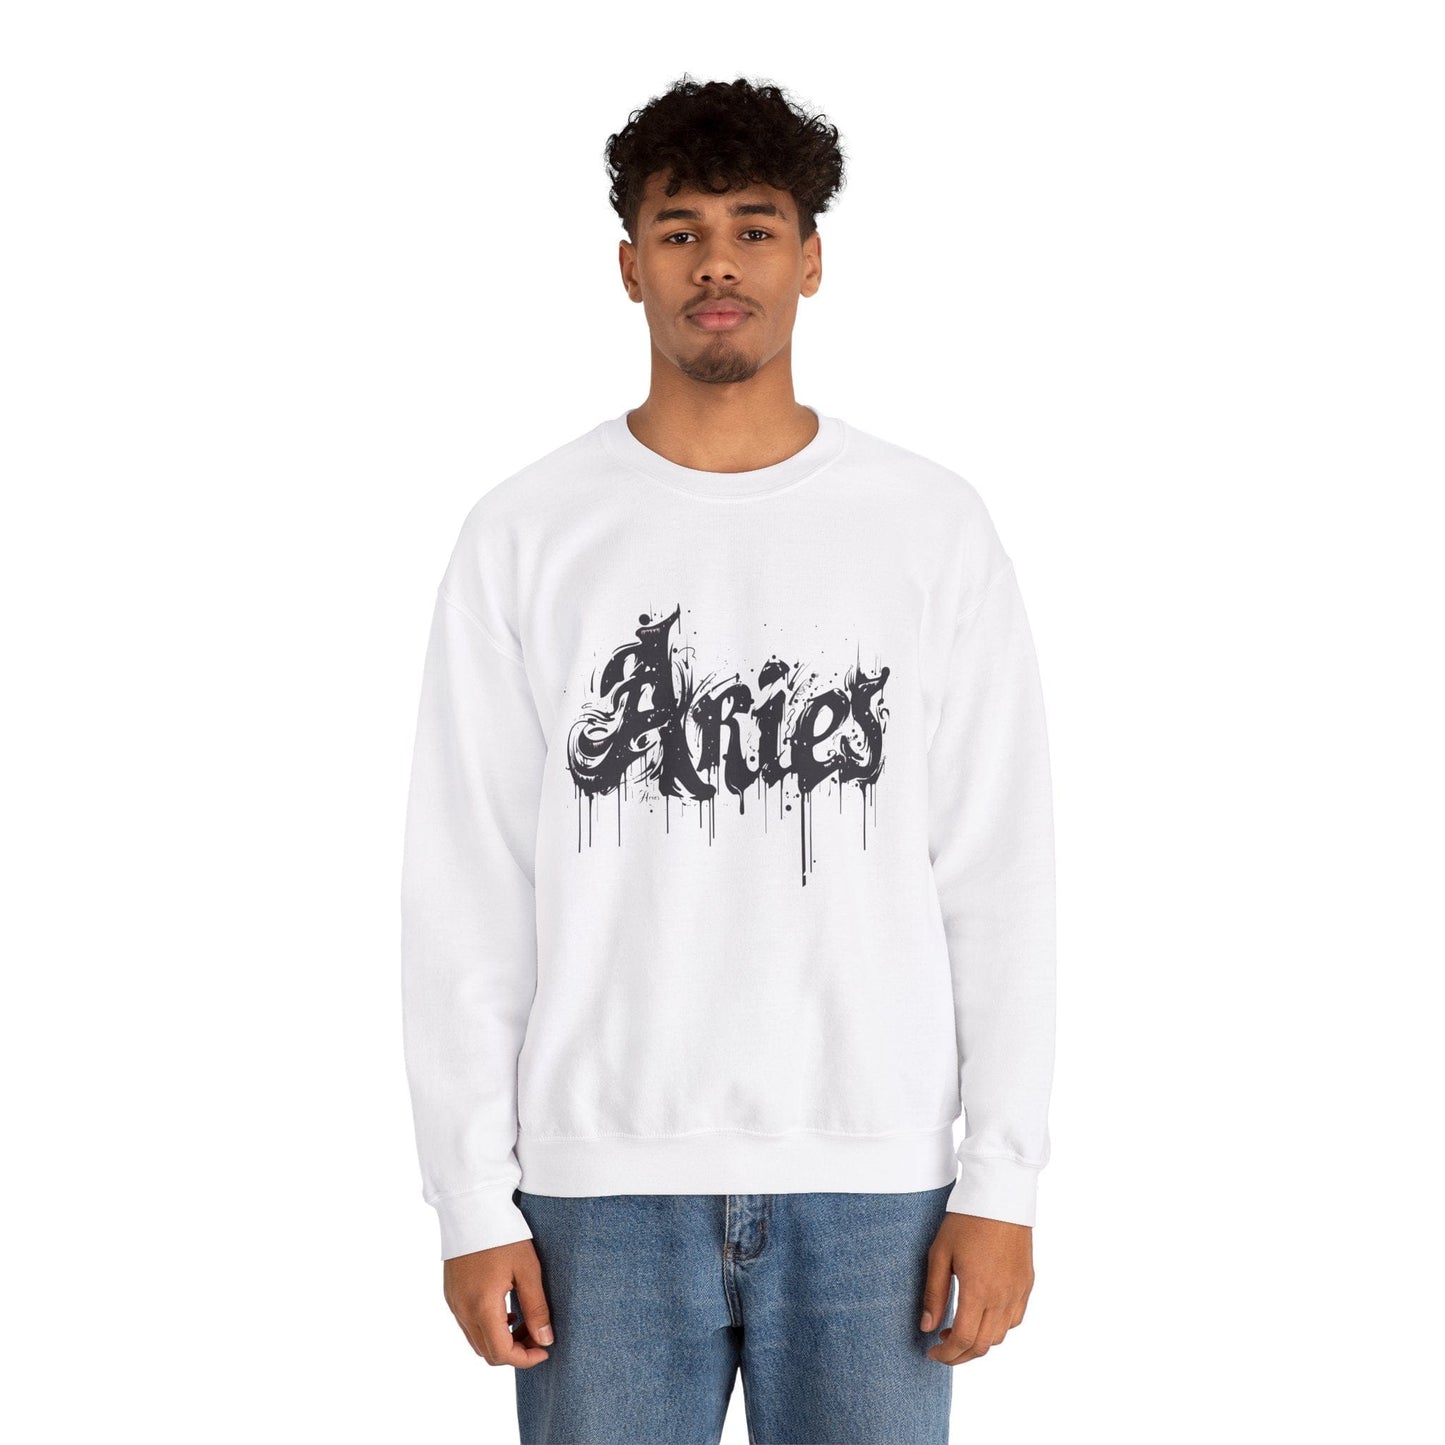 Sweatshirt Ink-Dripped Aries Energy Soft Sweater: Embrace Your Fire